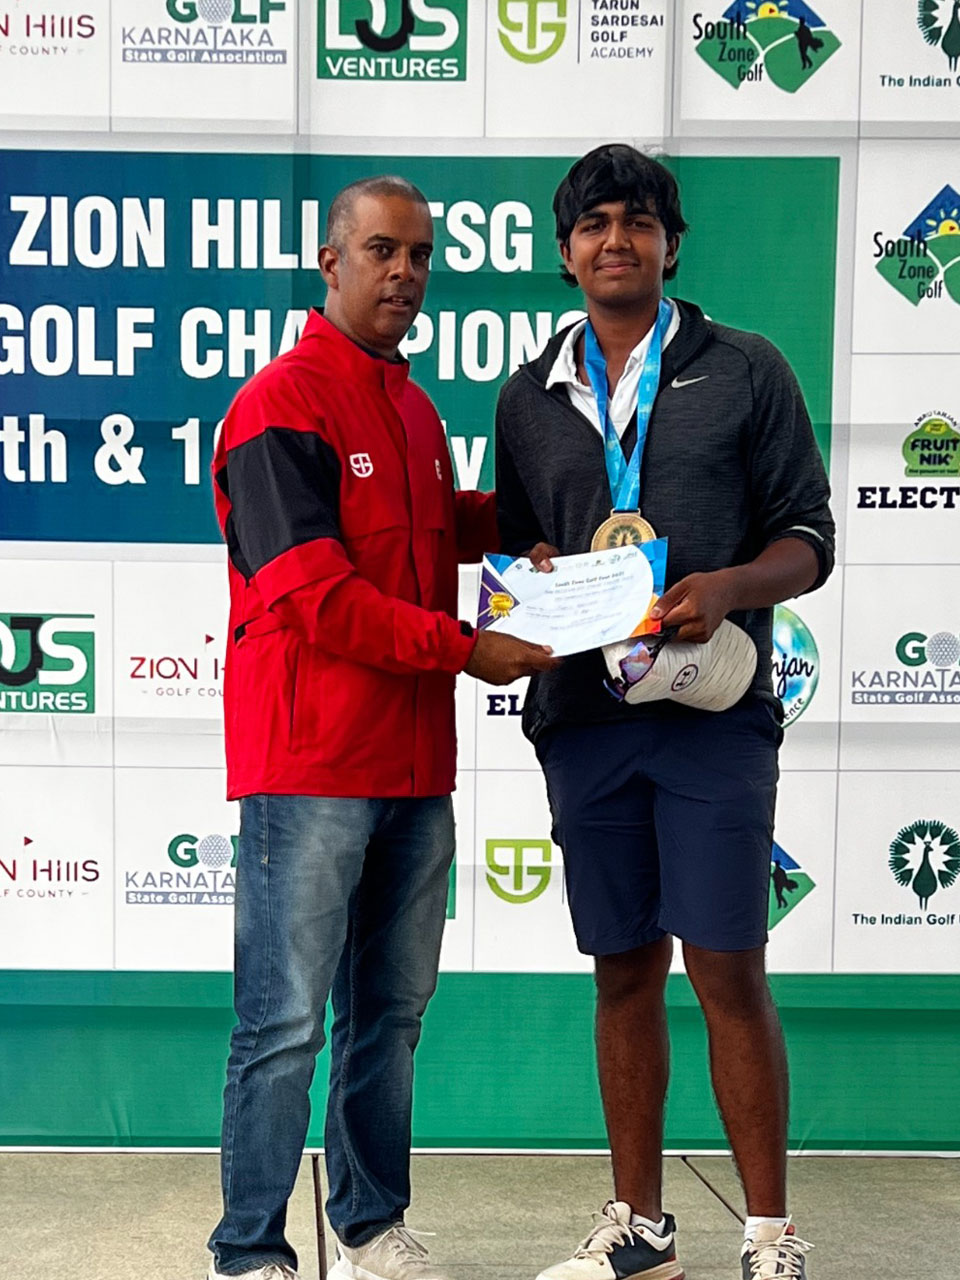 Shamit Dakhane finished 2nd in Category A Boys division